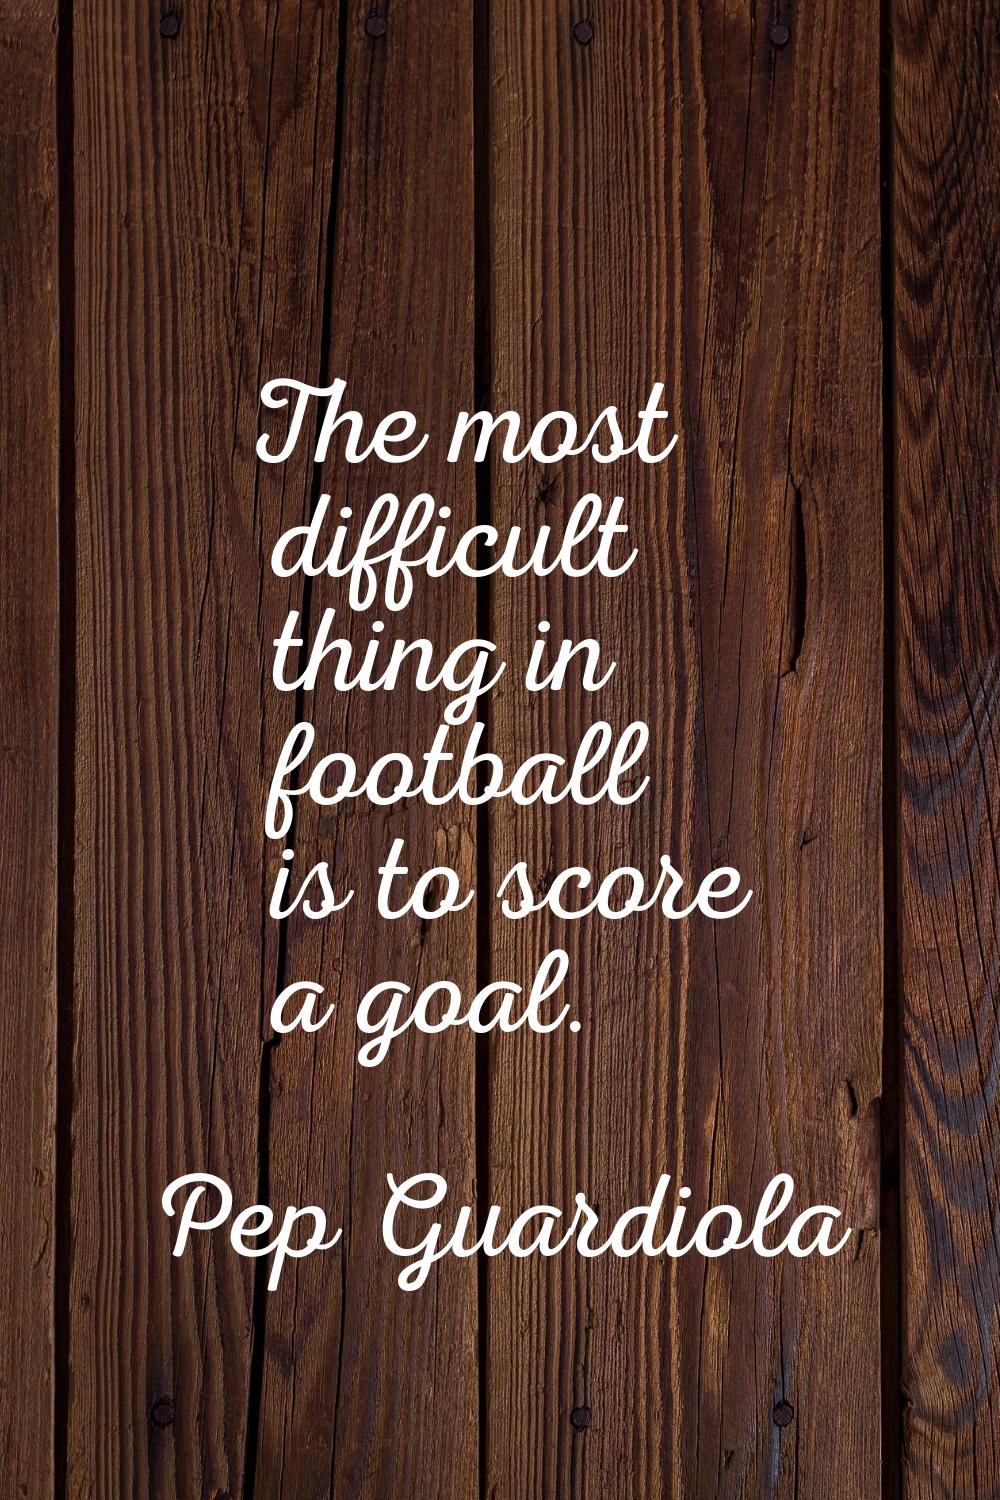 The most difficult thing in football is to score a goal.